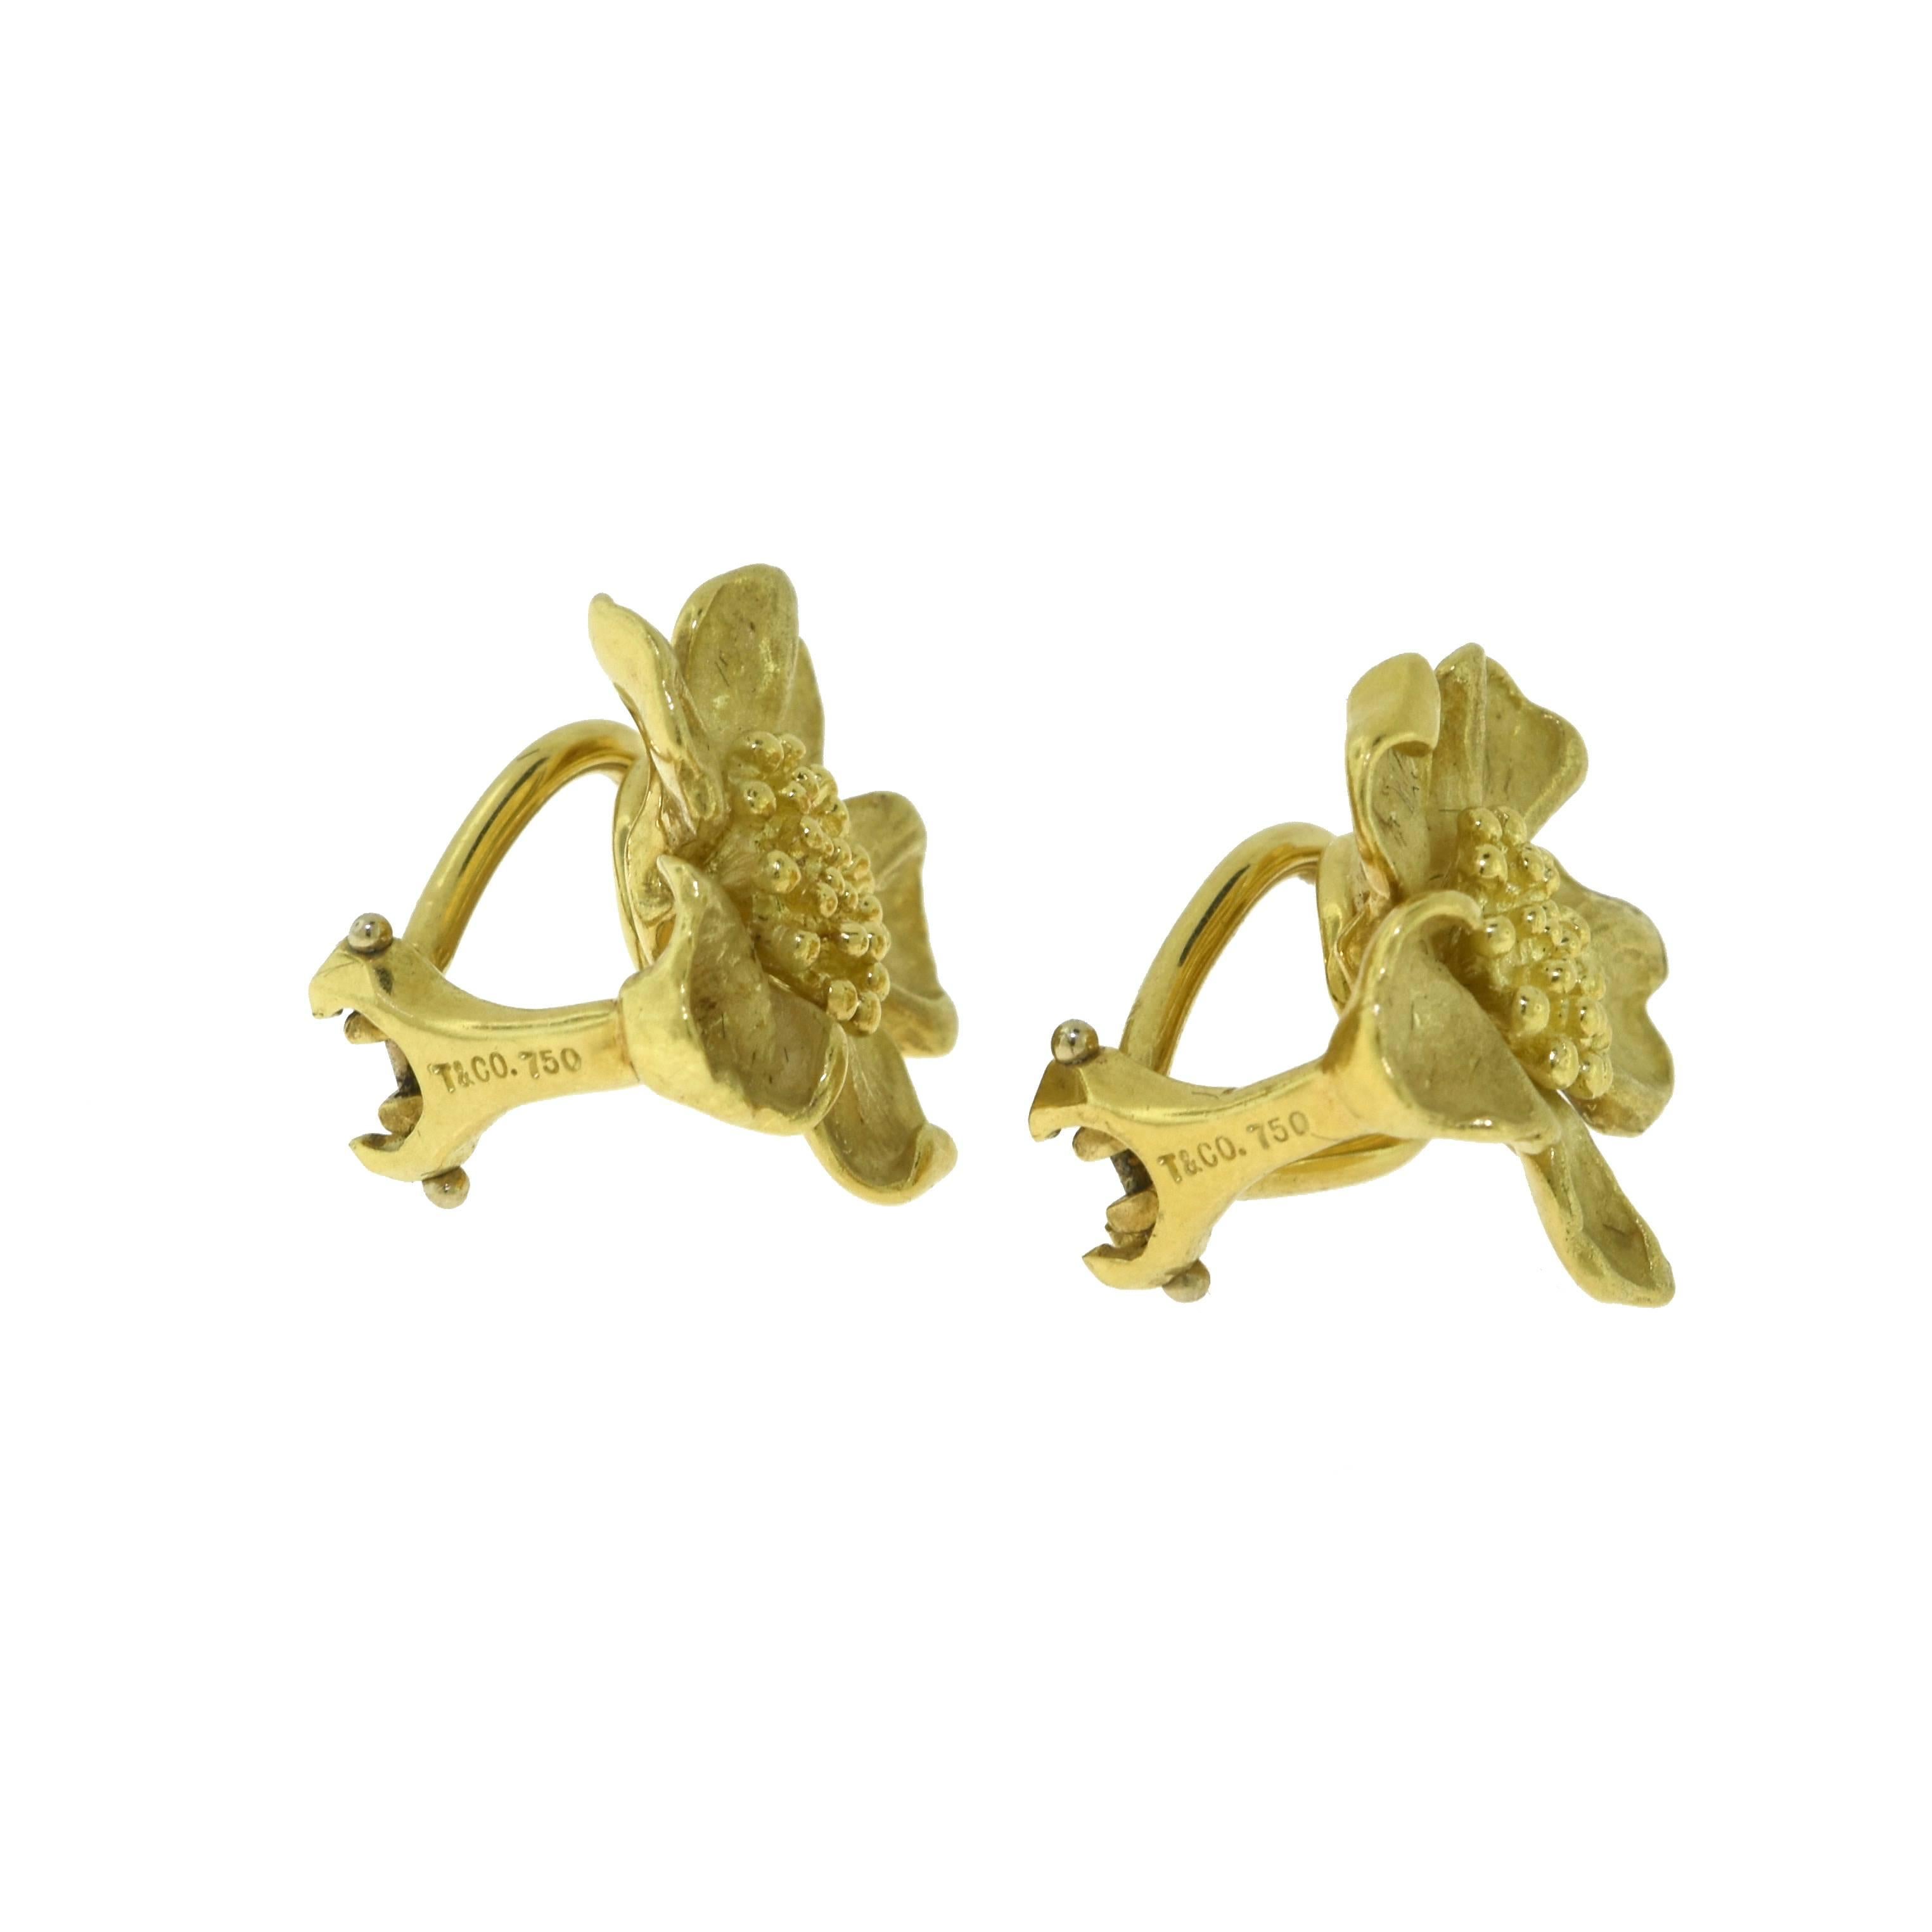 Tiffany & Co. Estate 18 Karat Yellow Gold Dogwood Flower Clips In Good Condition For Sale In Miami, FL